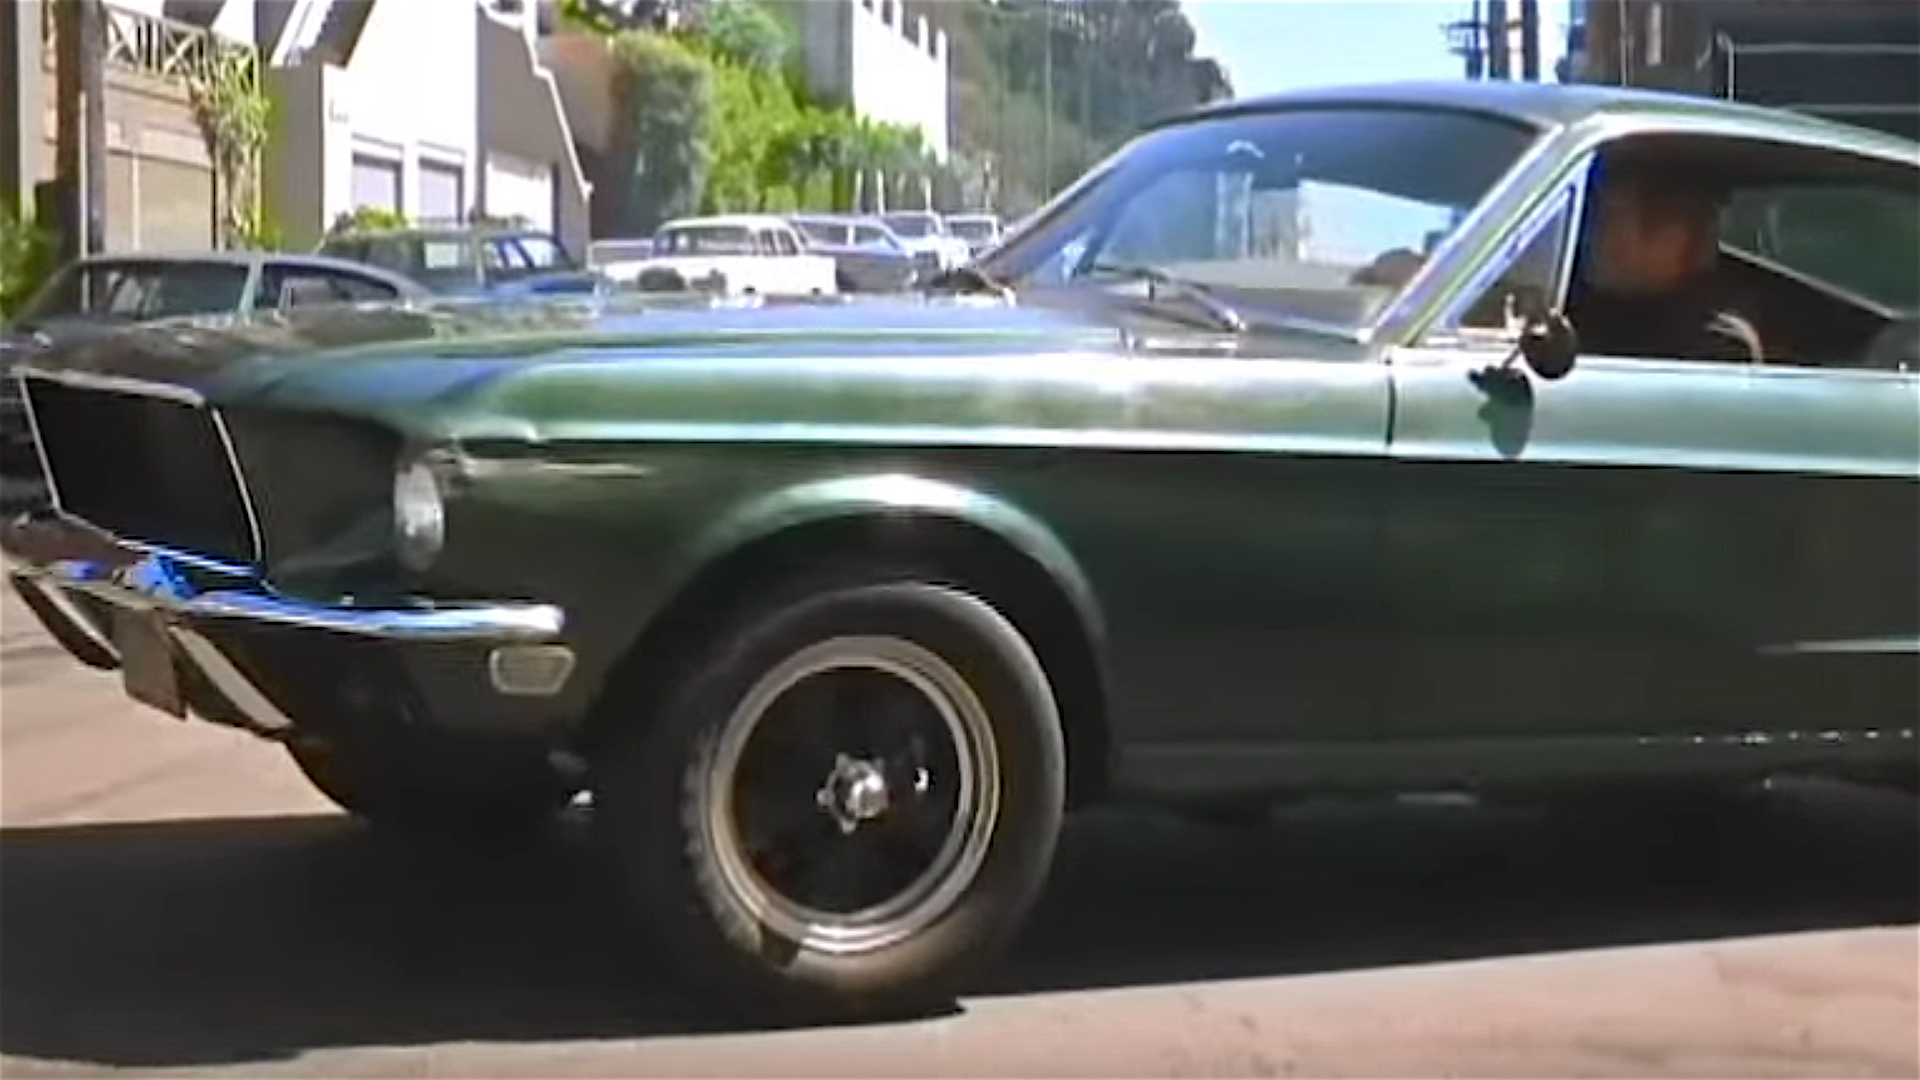 Missing Bullitt Mustang Possibly Found Decades Later